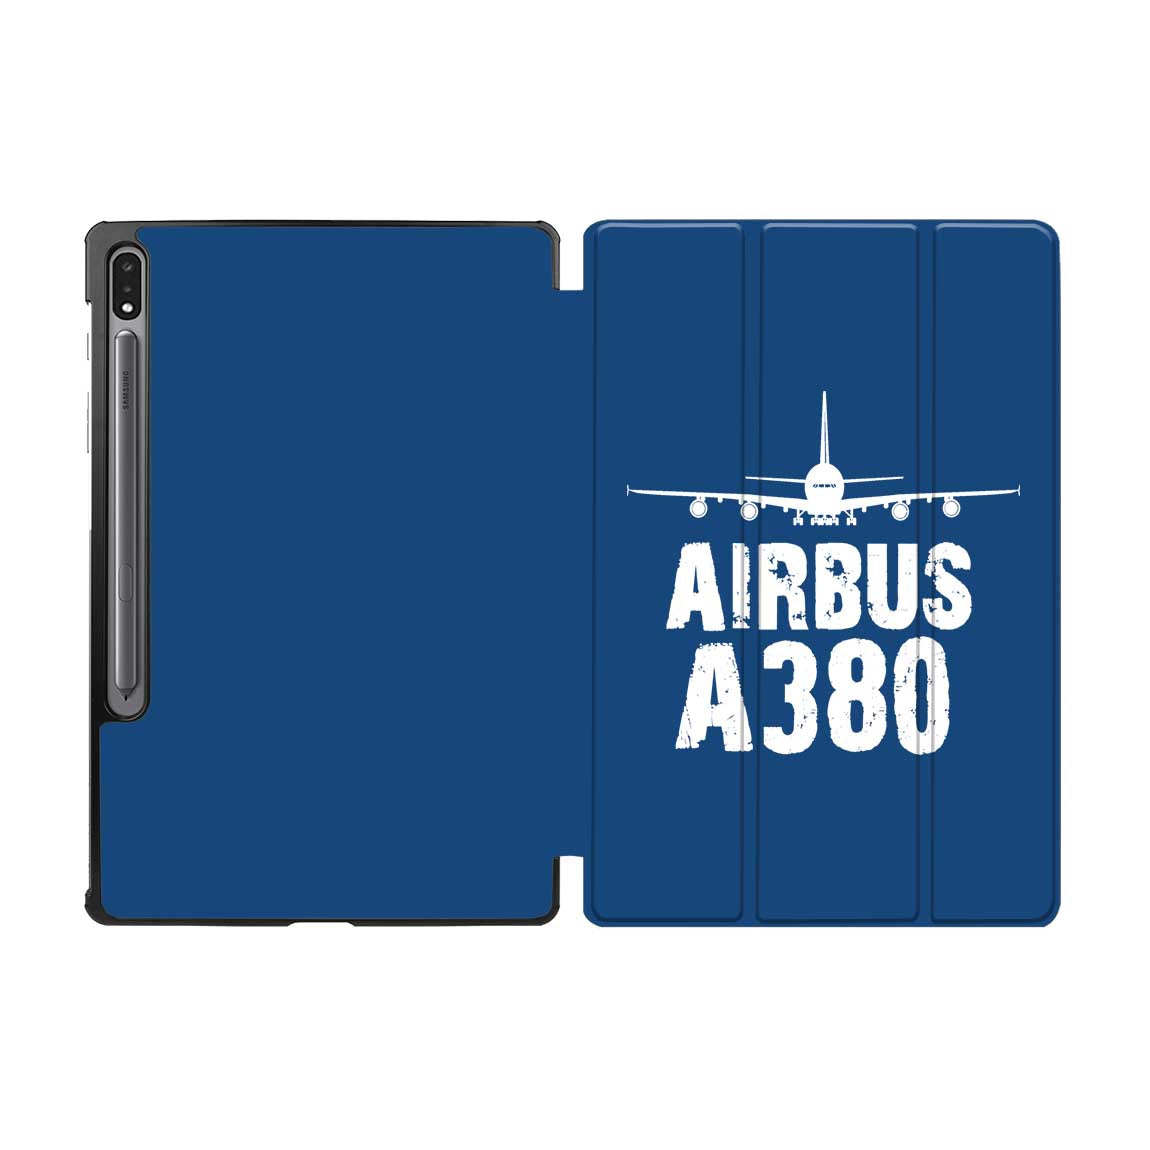 Airbus A380 & Plane Designed Samsung Tablet Cases